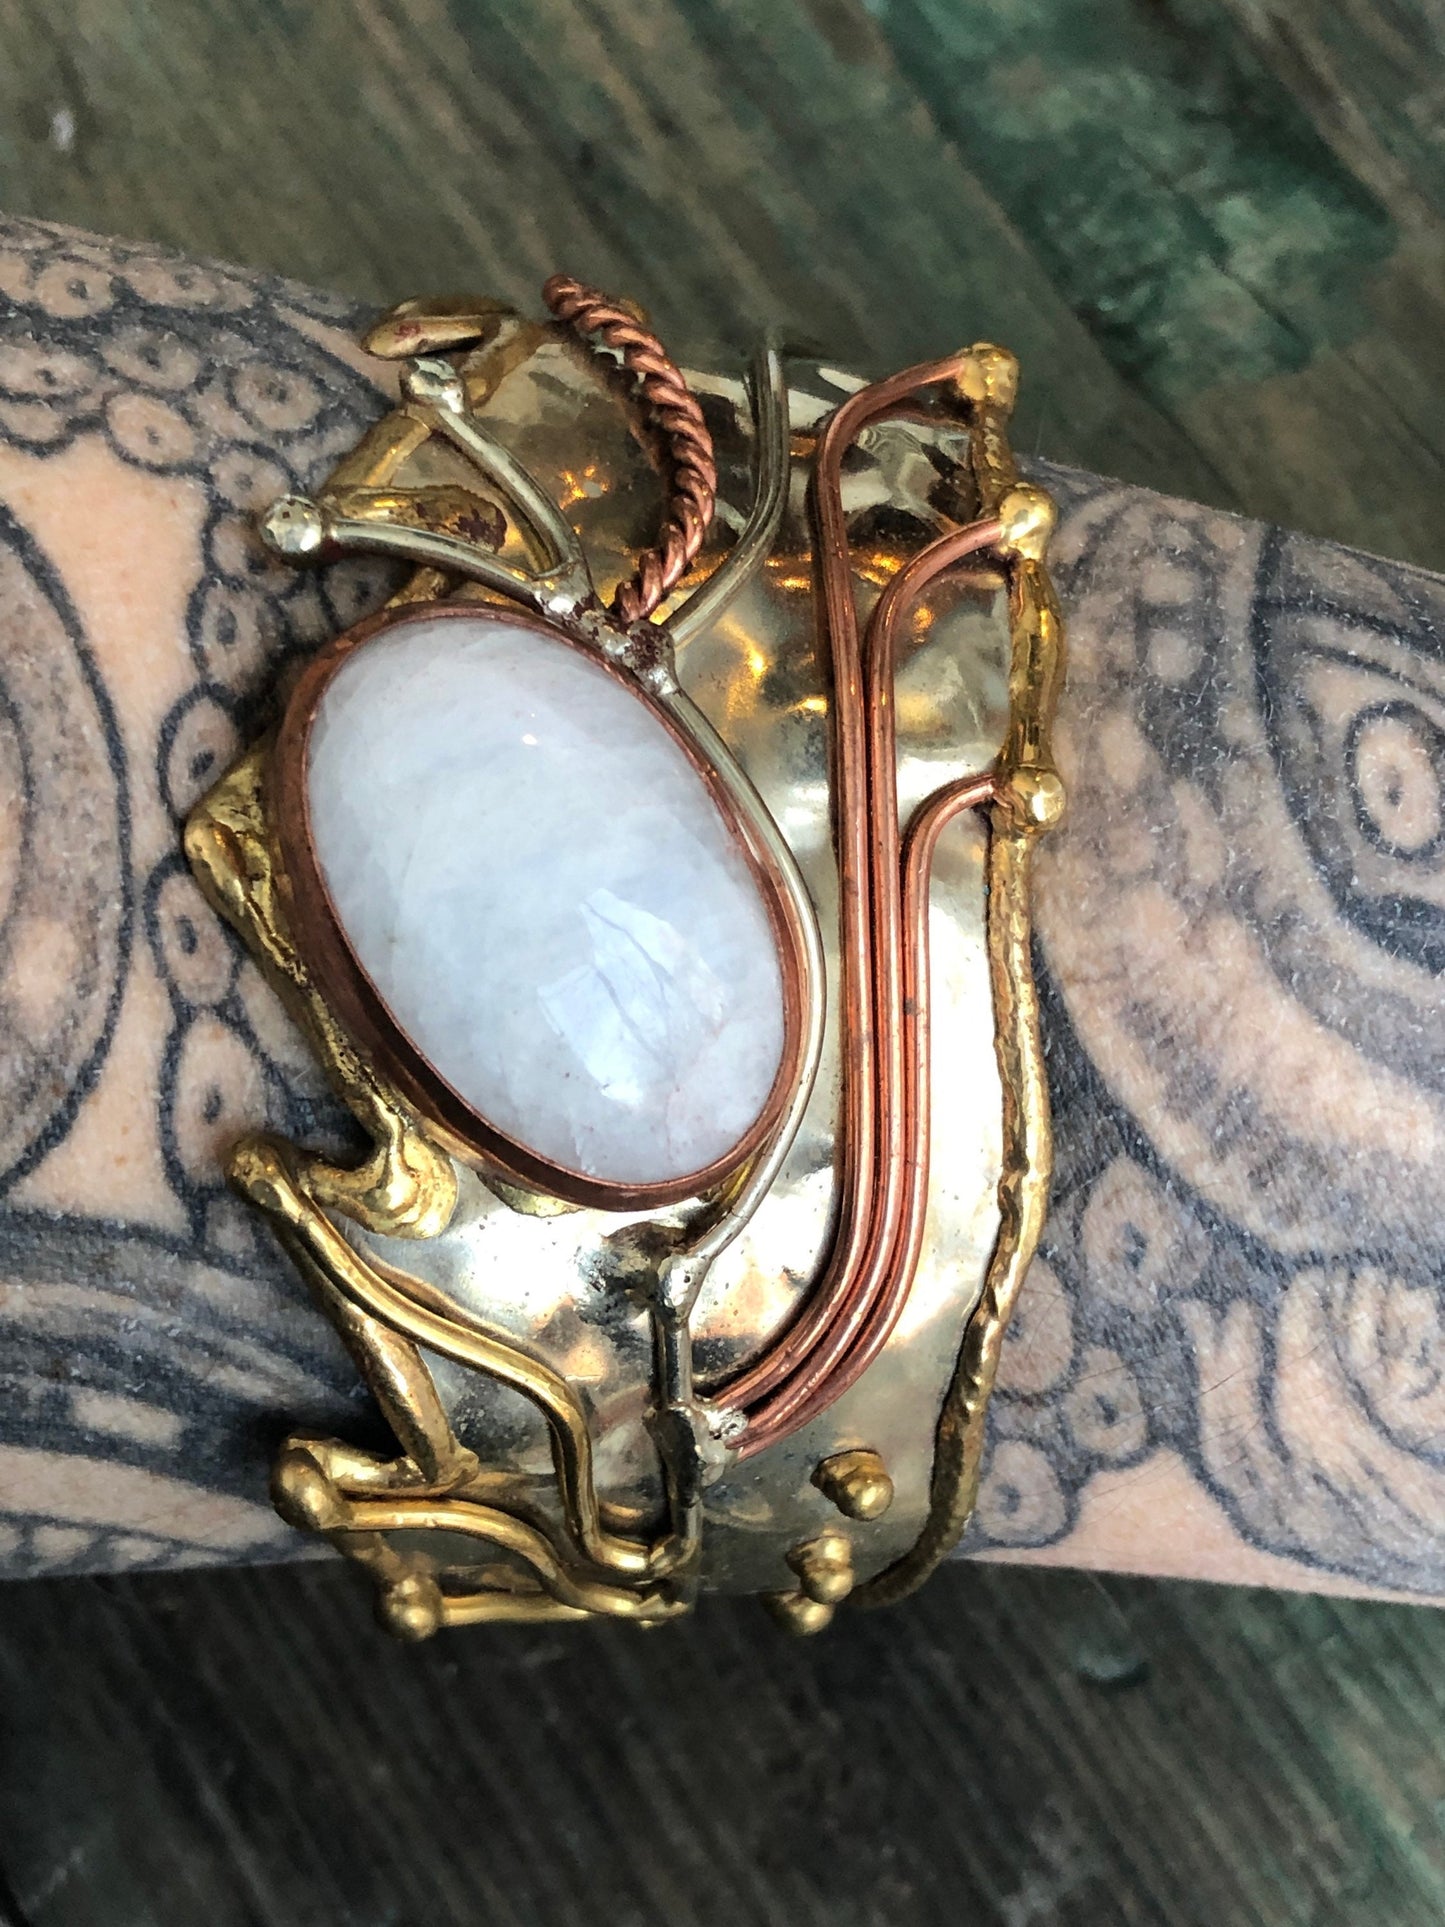 Rainbow Moonstone Cabochon Mixed Metal, Chunky, Barbaric, Arts & Crafts Handmade Silver, Copper and Brass Cuff Bracelet